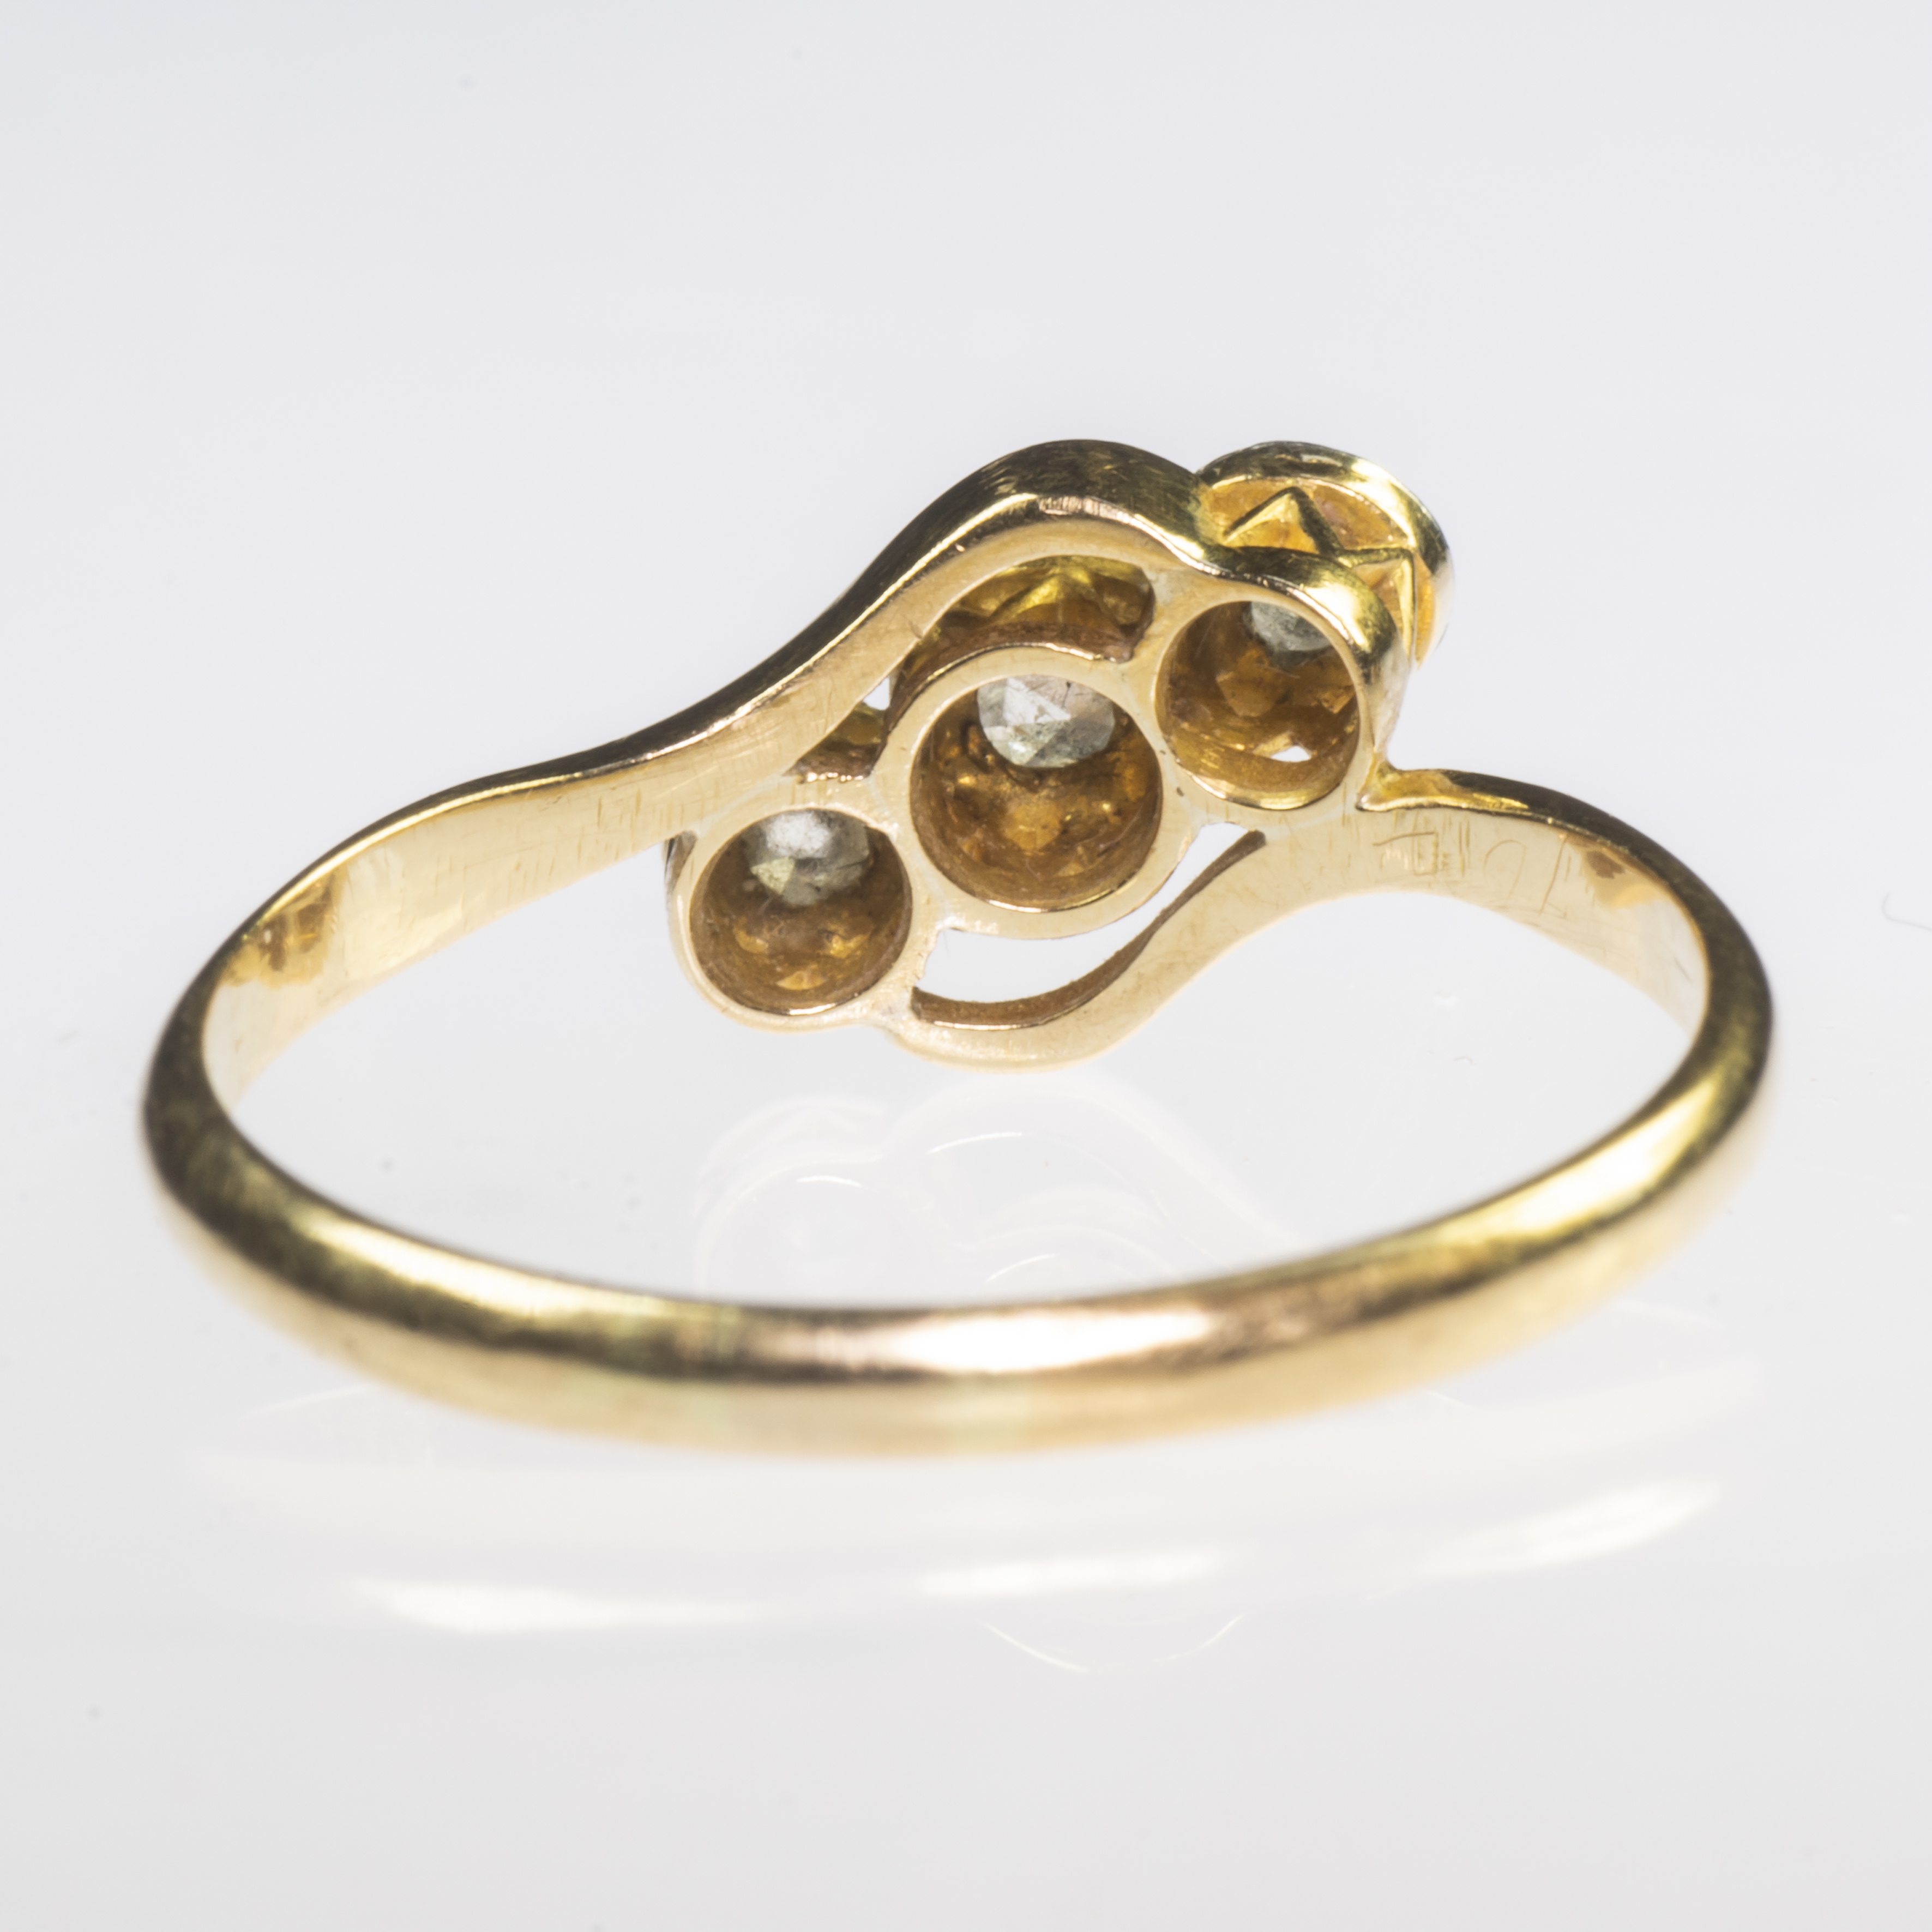 AN 18CT YELLOW GOLD AND PLATINUM DIAMOND SET CROSSOVER RING - Image 3 of 3